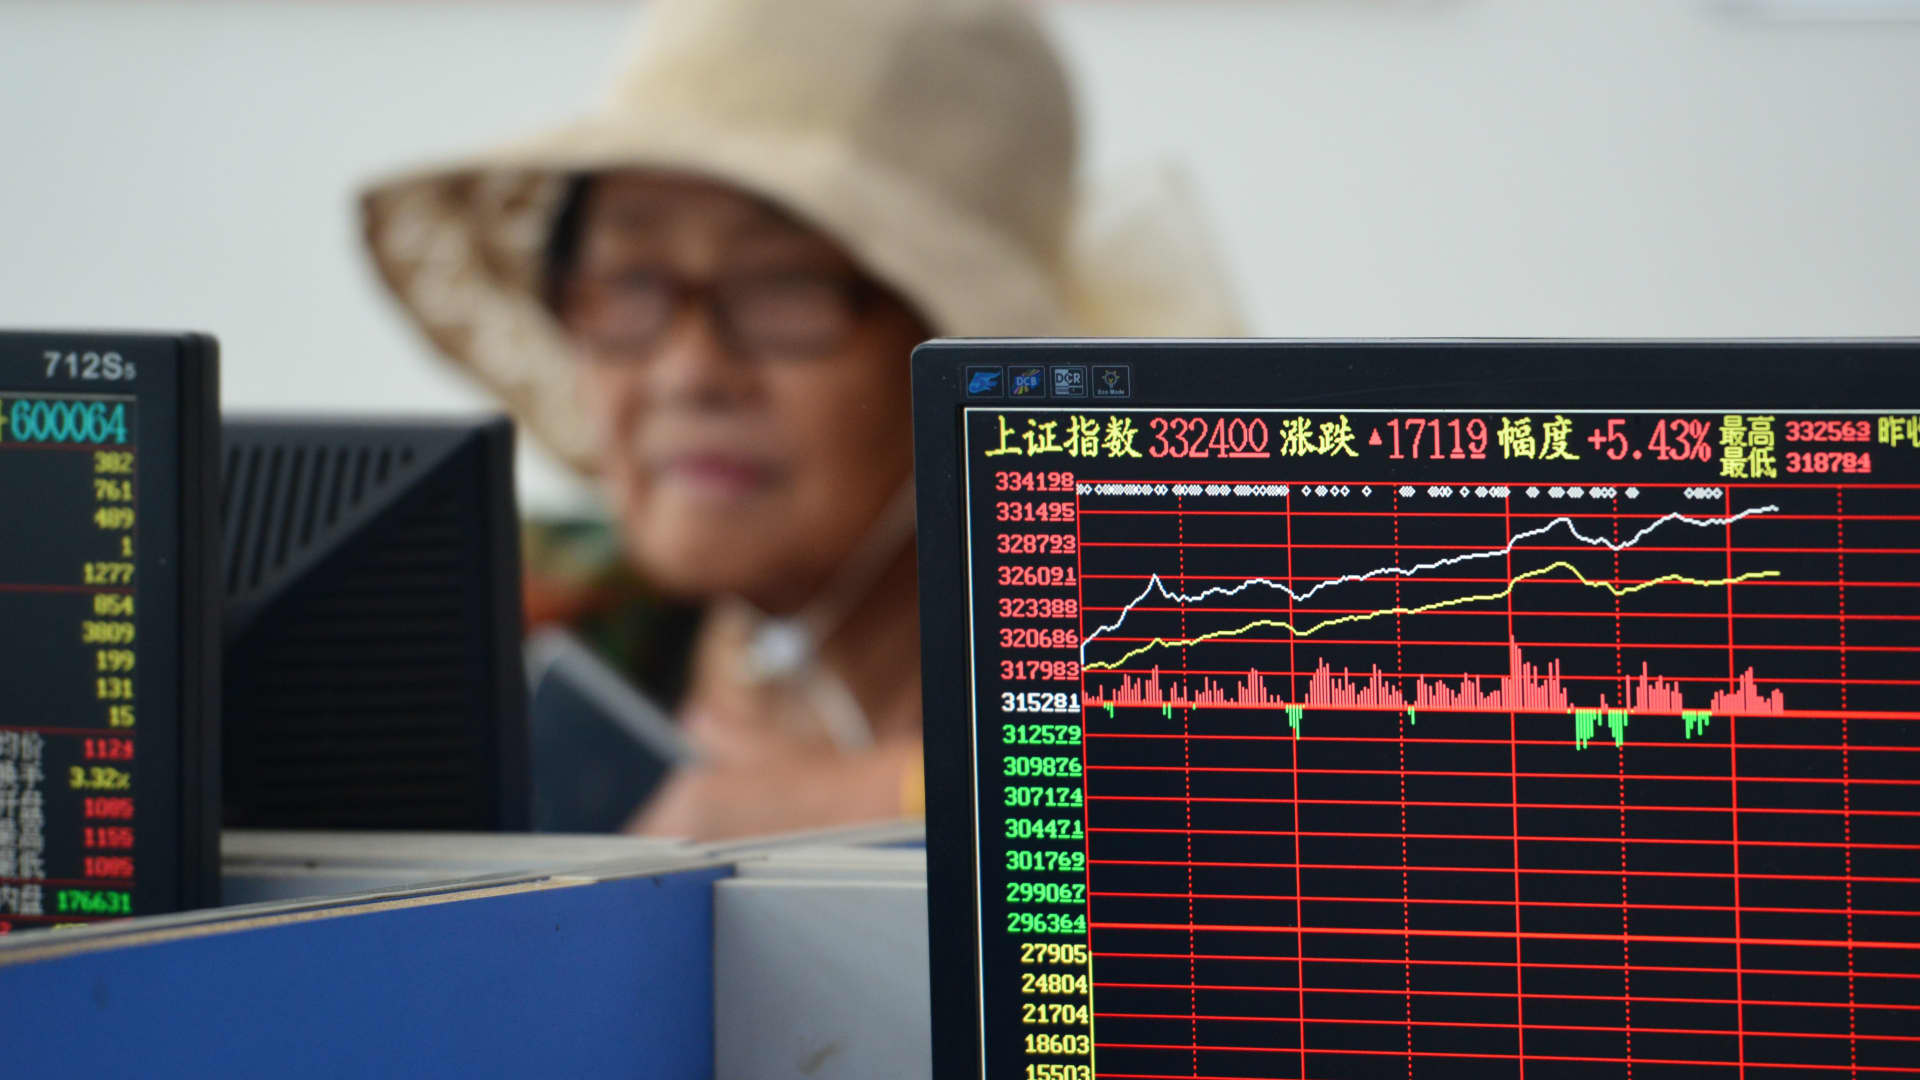 China told citizens to buy stocks, boosting market — 'We have the Fed...China has its state media'